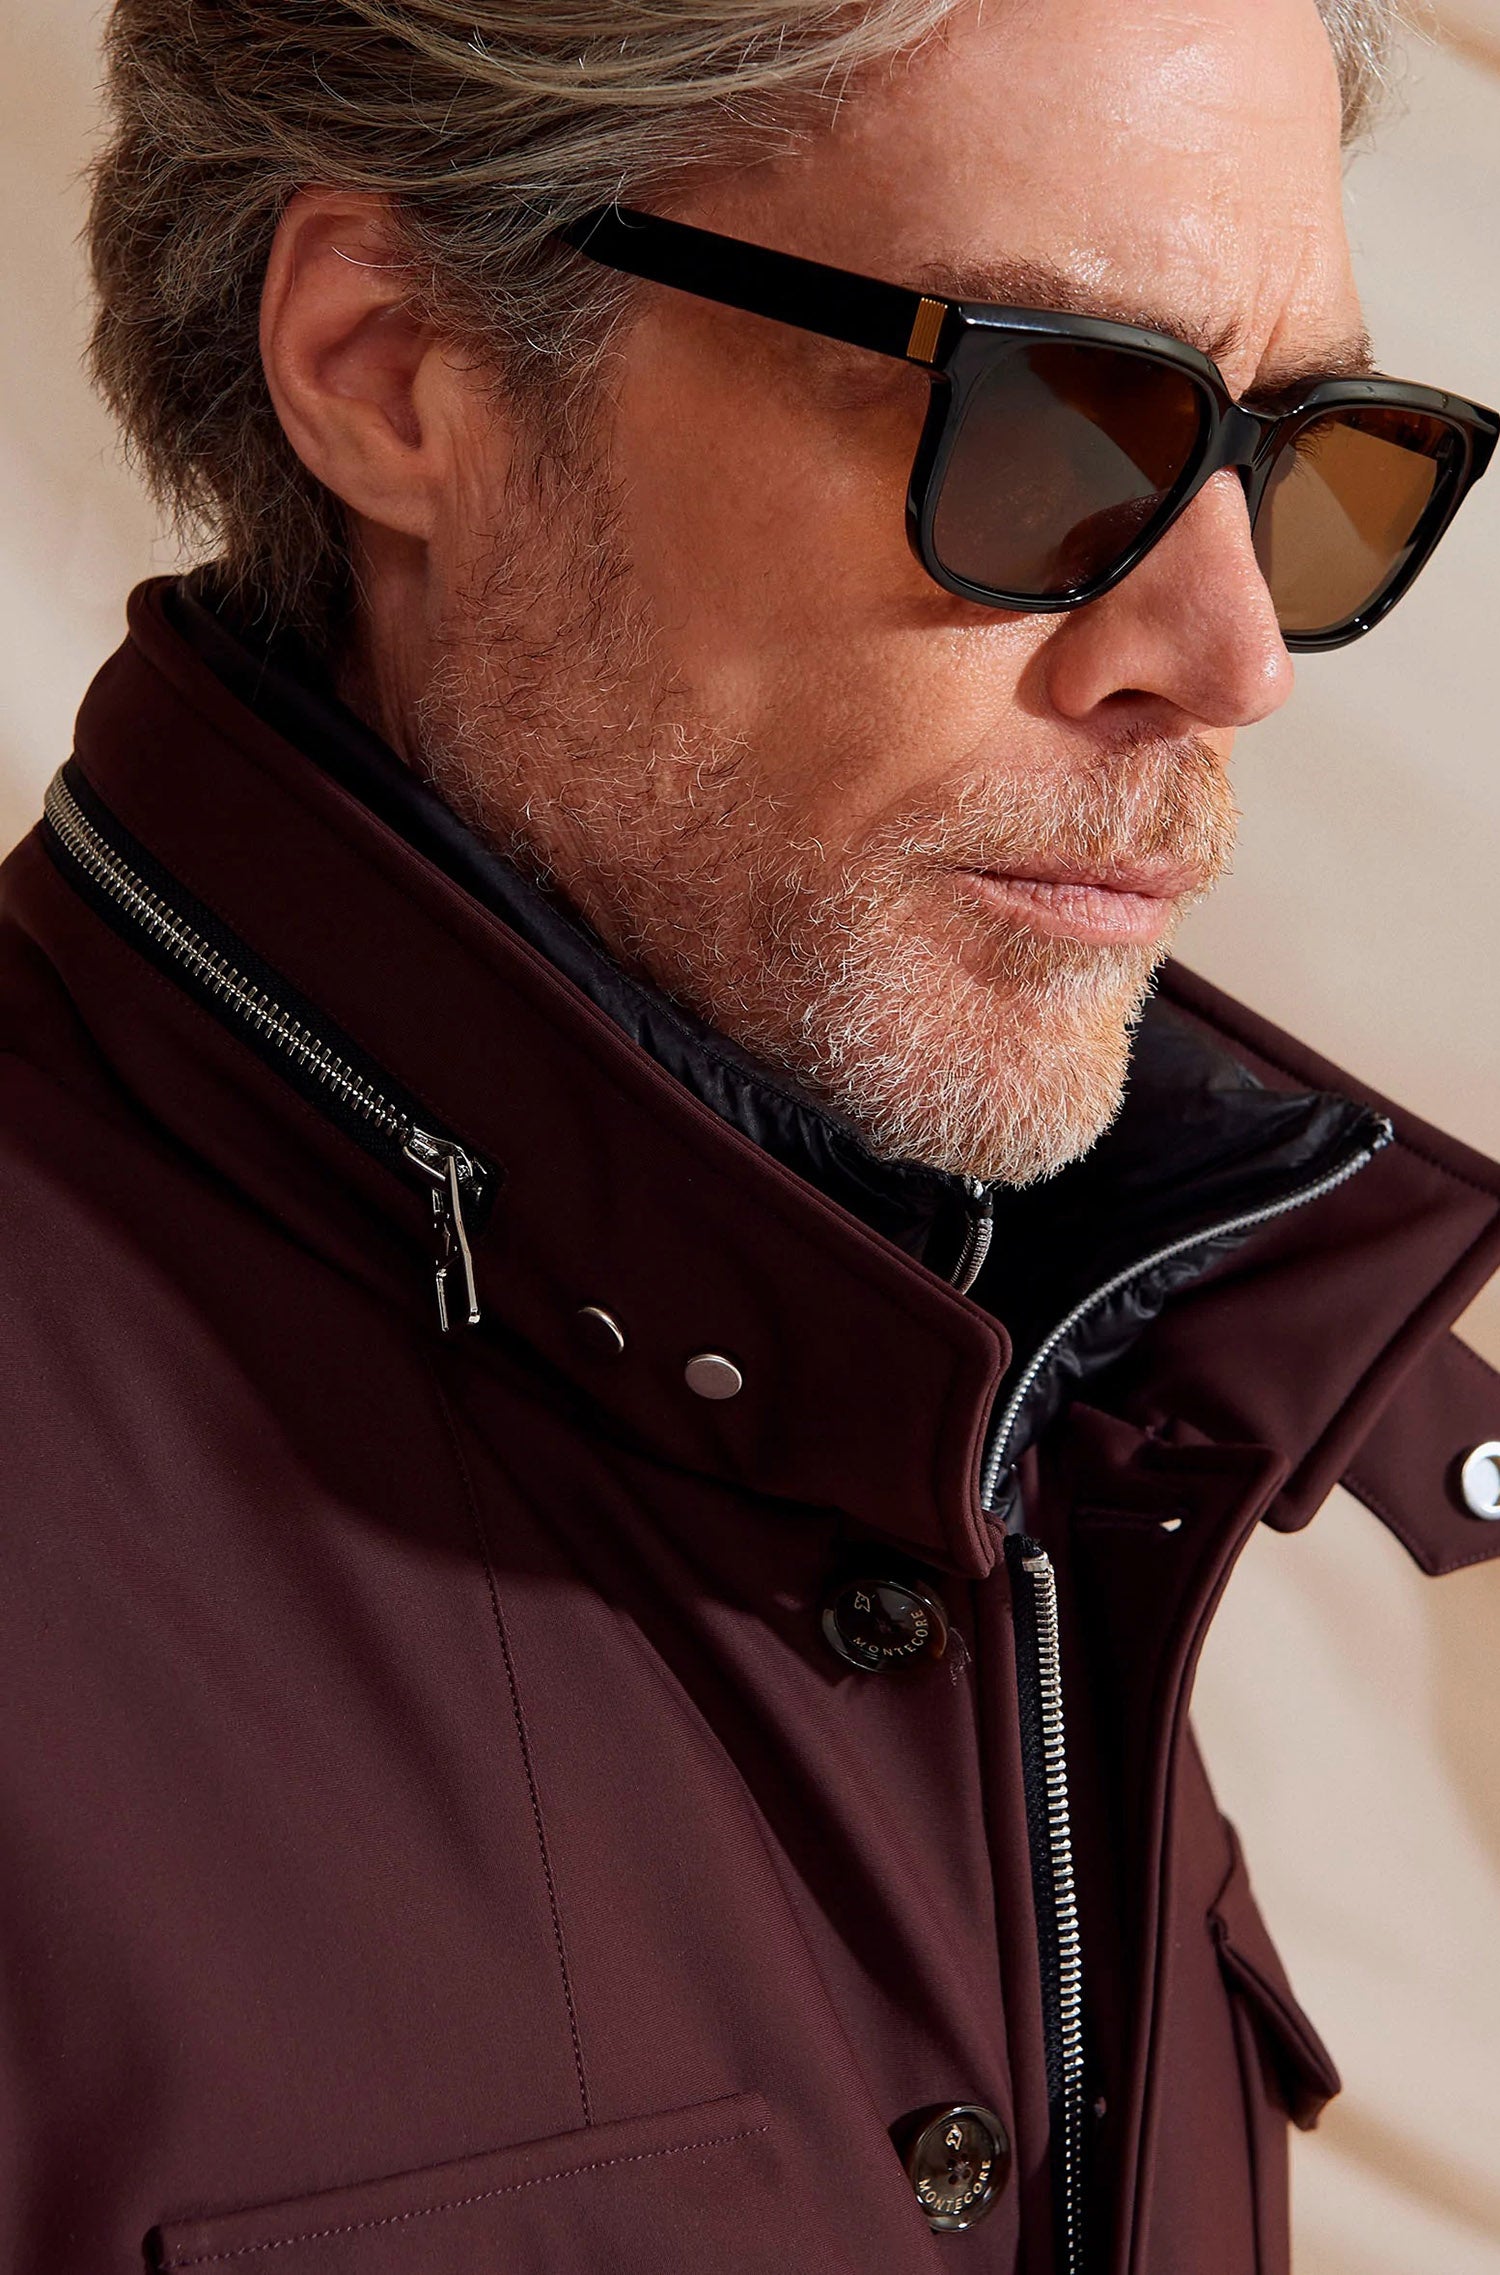 MONTECORE - Winter Jacket In Ultra-High-Density Fabric In Oxblood Red. F03MUCX536 101-20